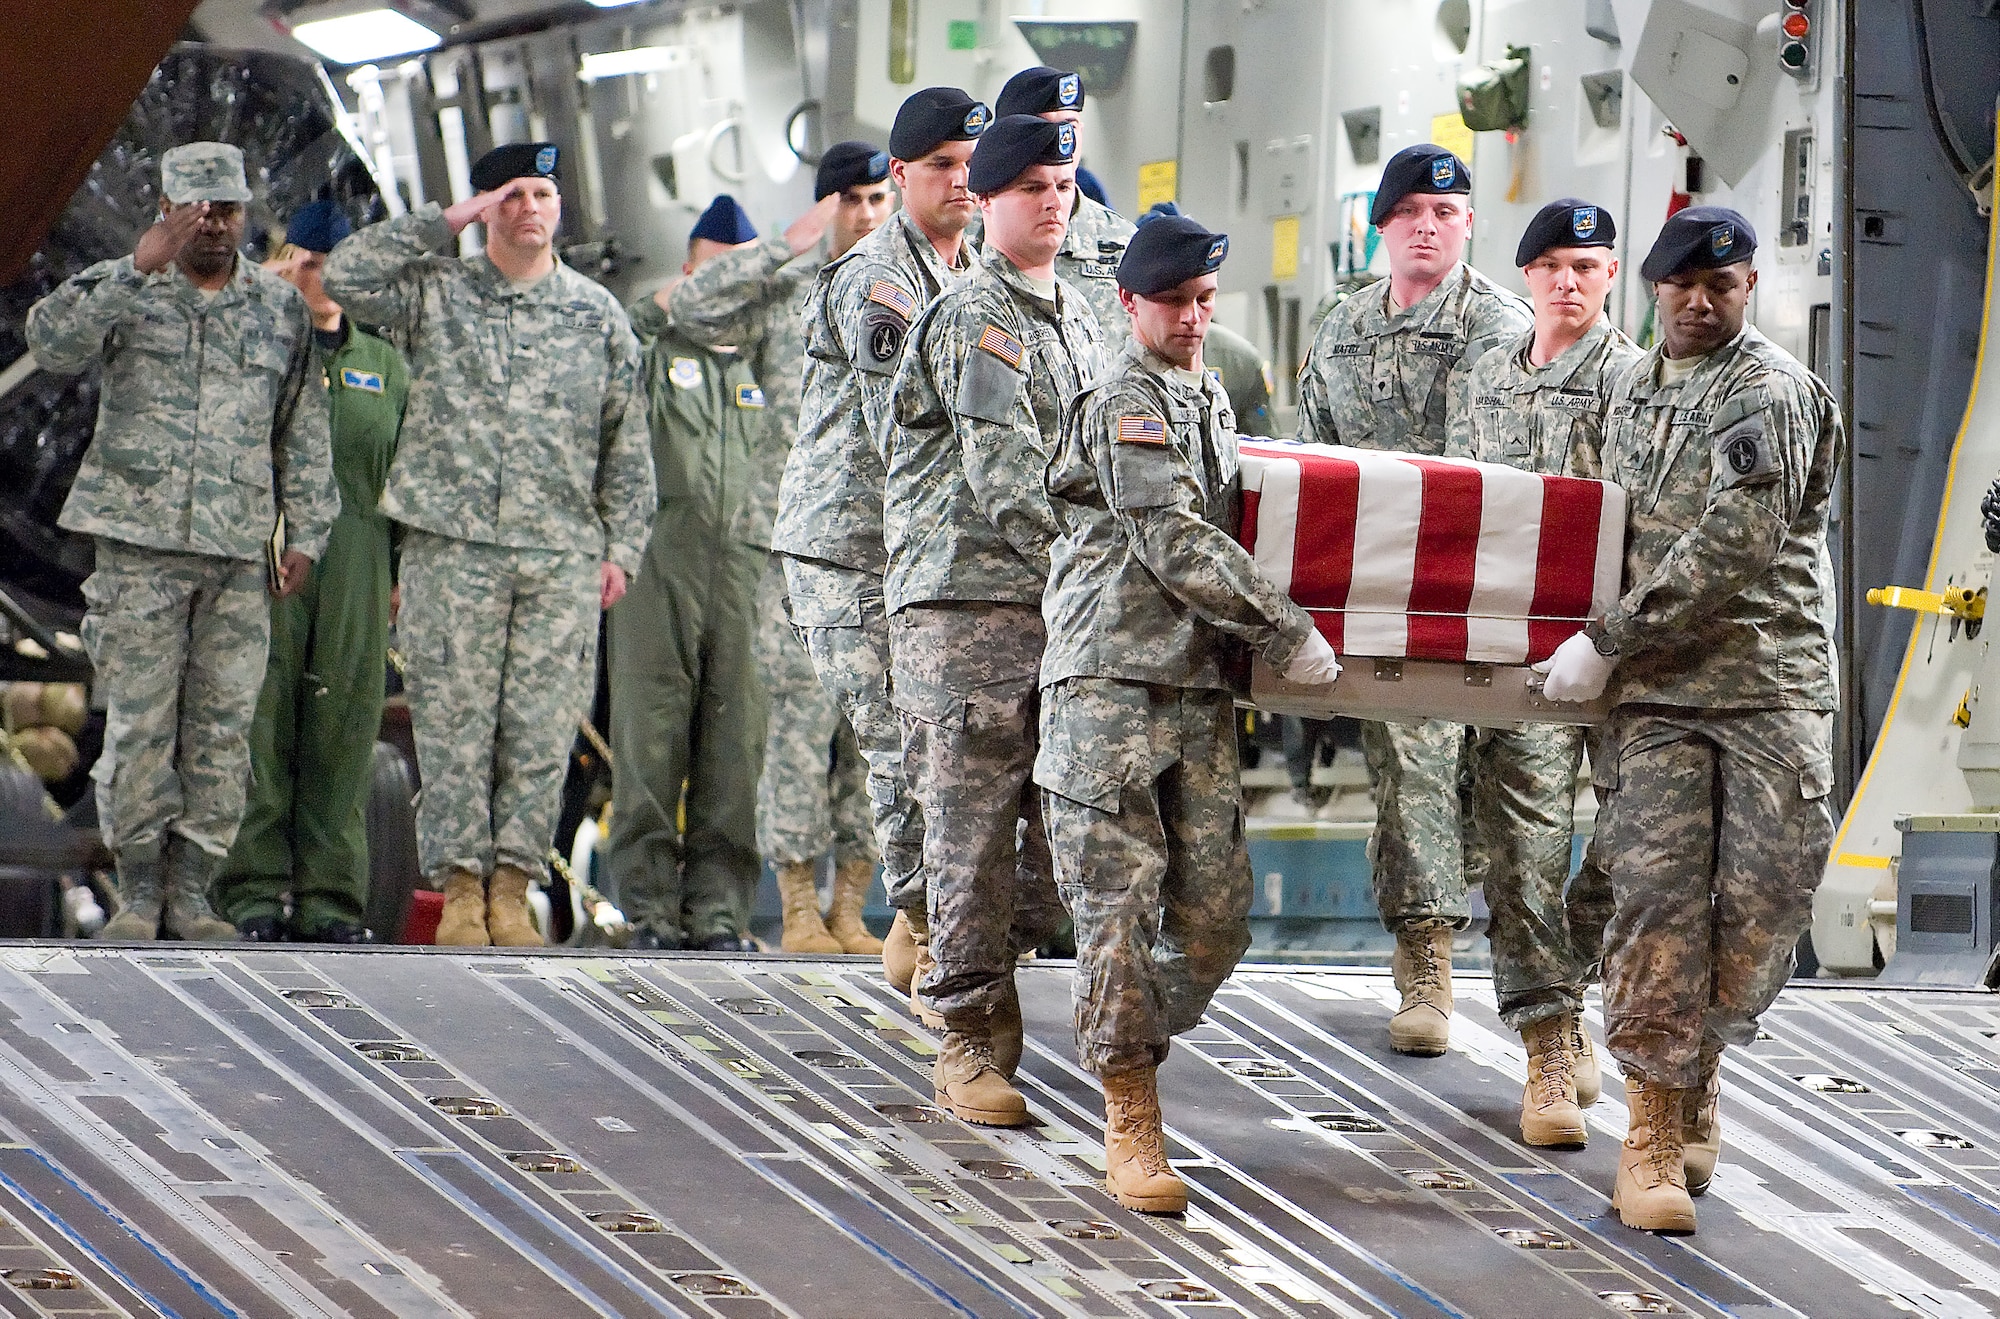 Soldiers carry the remains of Army Spc. Israel Candelaria Mejias of San Lorenzo, Puerto Rico, off an aircraft April 7, 2009, at Dover Air Force Base, Del., which has the only stateside port mortuary. Specialist Candelaria Mejias died April 5 near Baghdad, Iraq, of wounds sustained when a mine detonated near him during combat operations. (U.S. Air Force photo/Roland Balik)